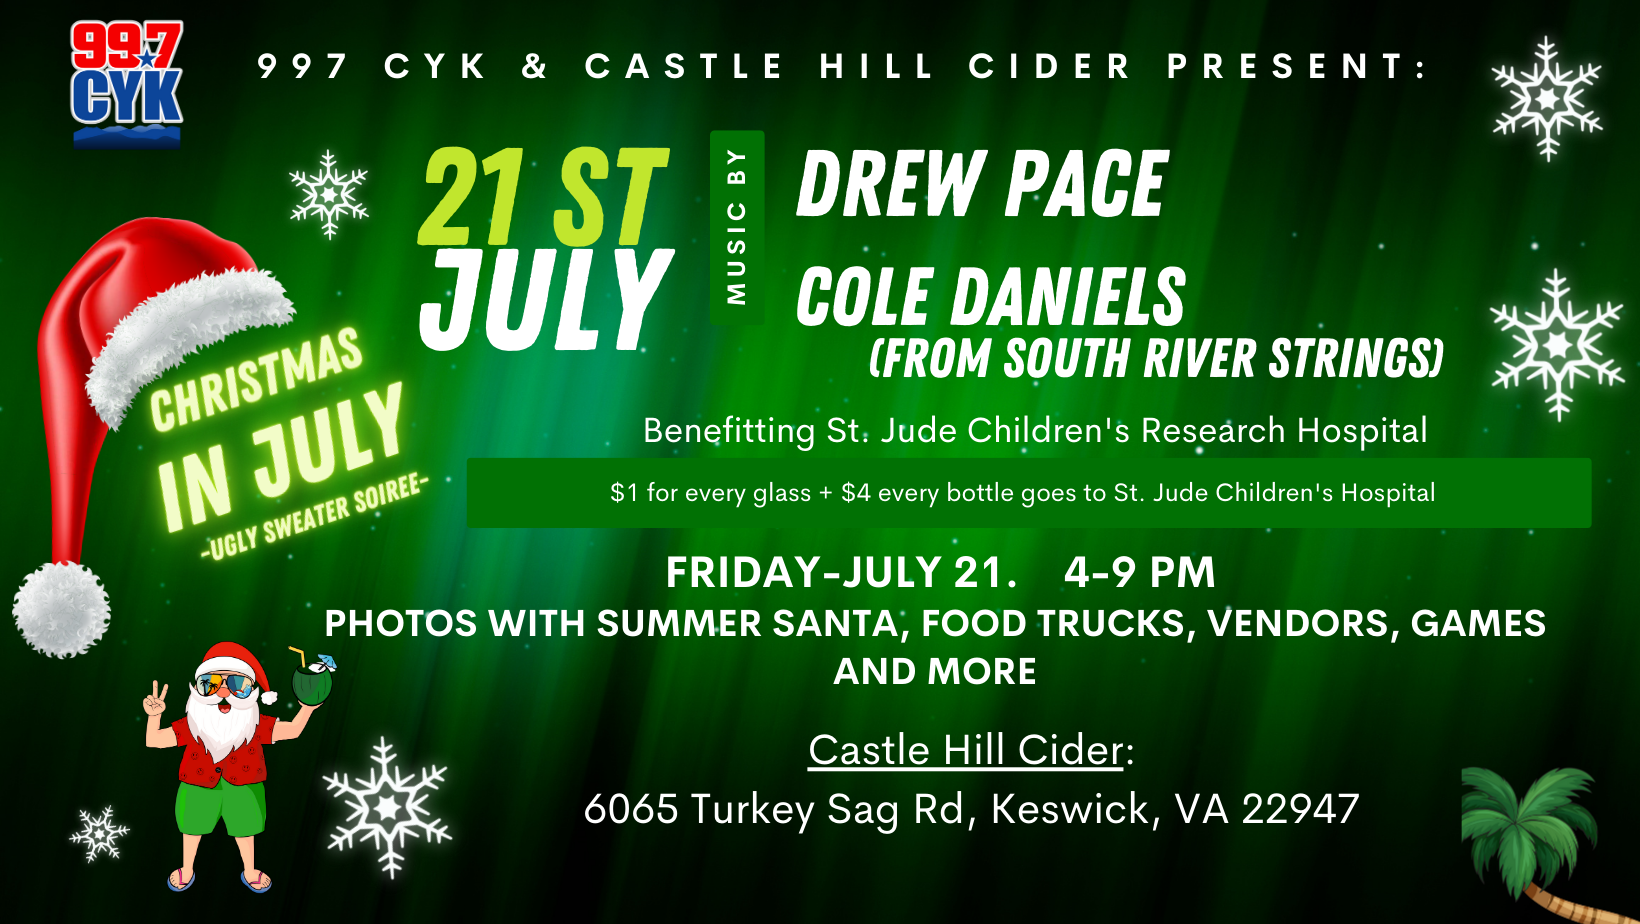 997 CYK and Castle Hill Cider Presents THE CHRISTMAS IN JULY UGLY SWEATER SOIREE Benefitting St. Jude Children’s Research Hospital